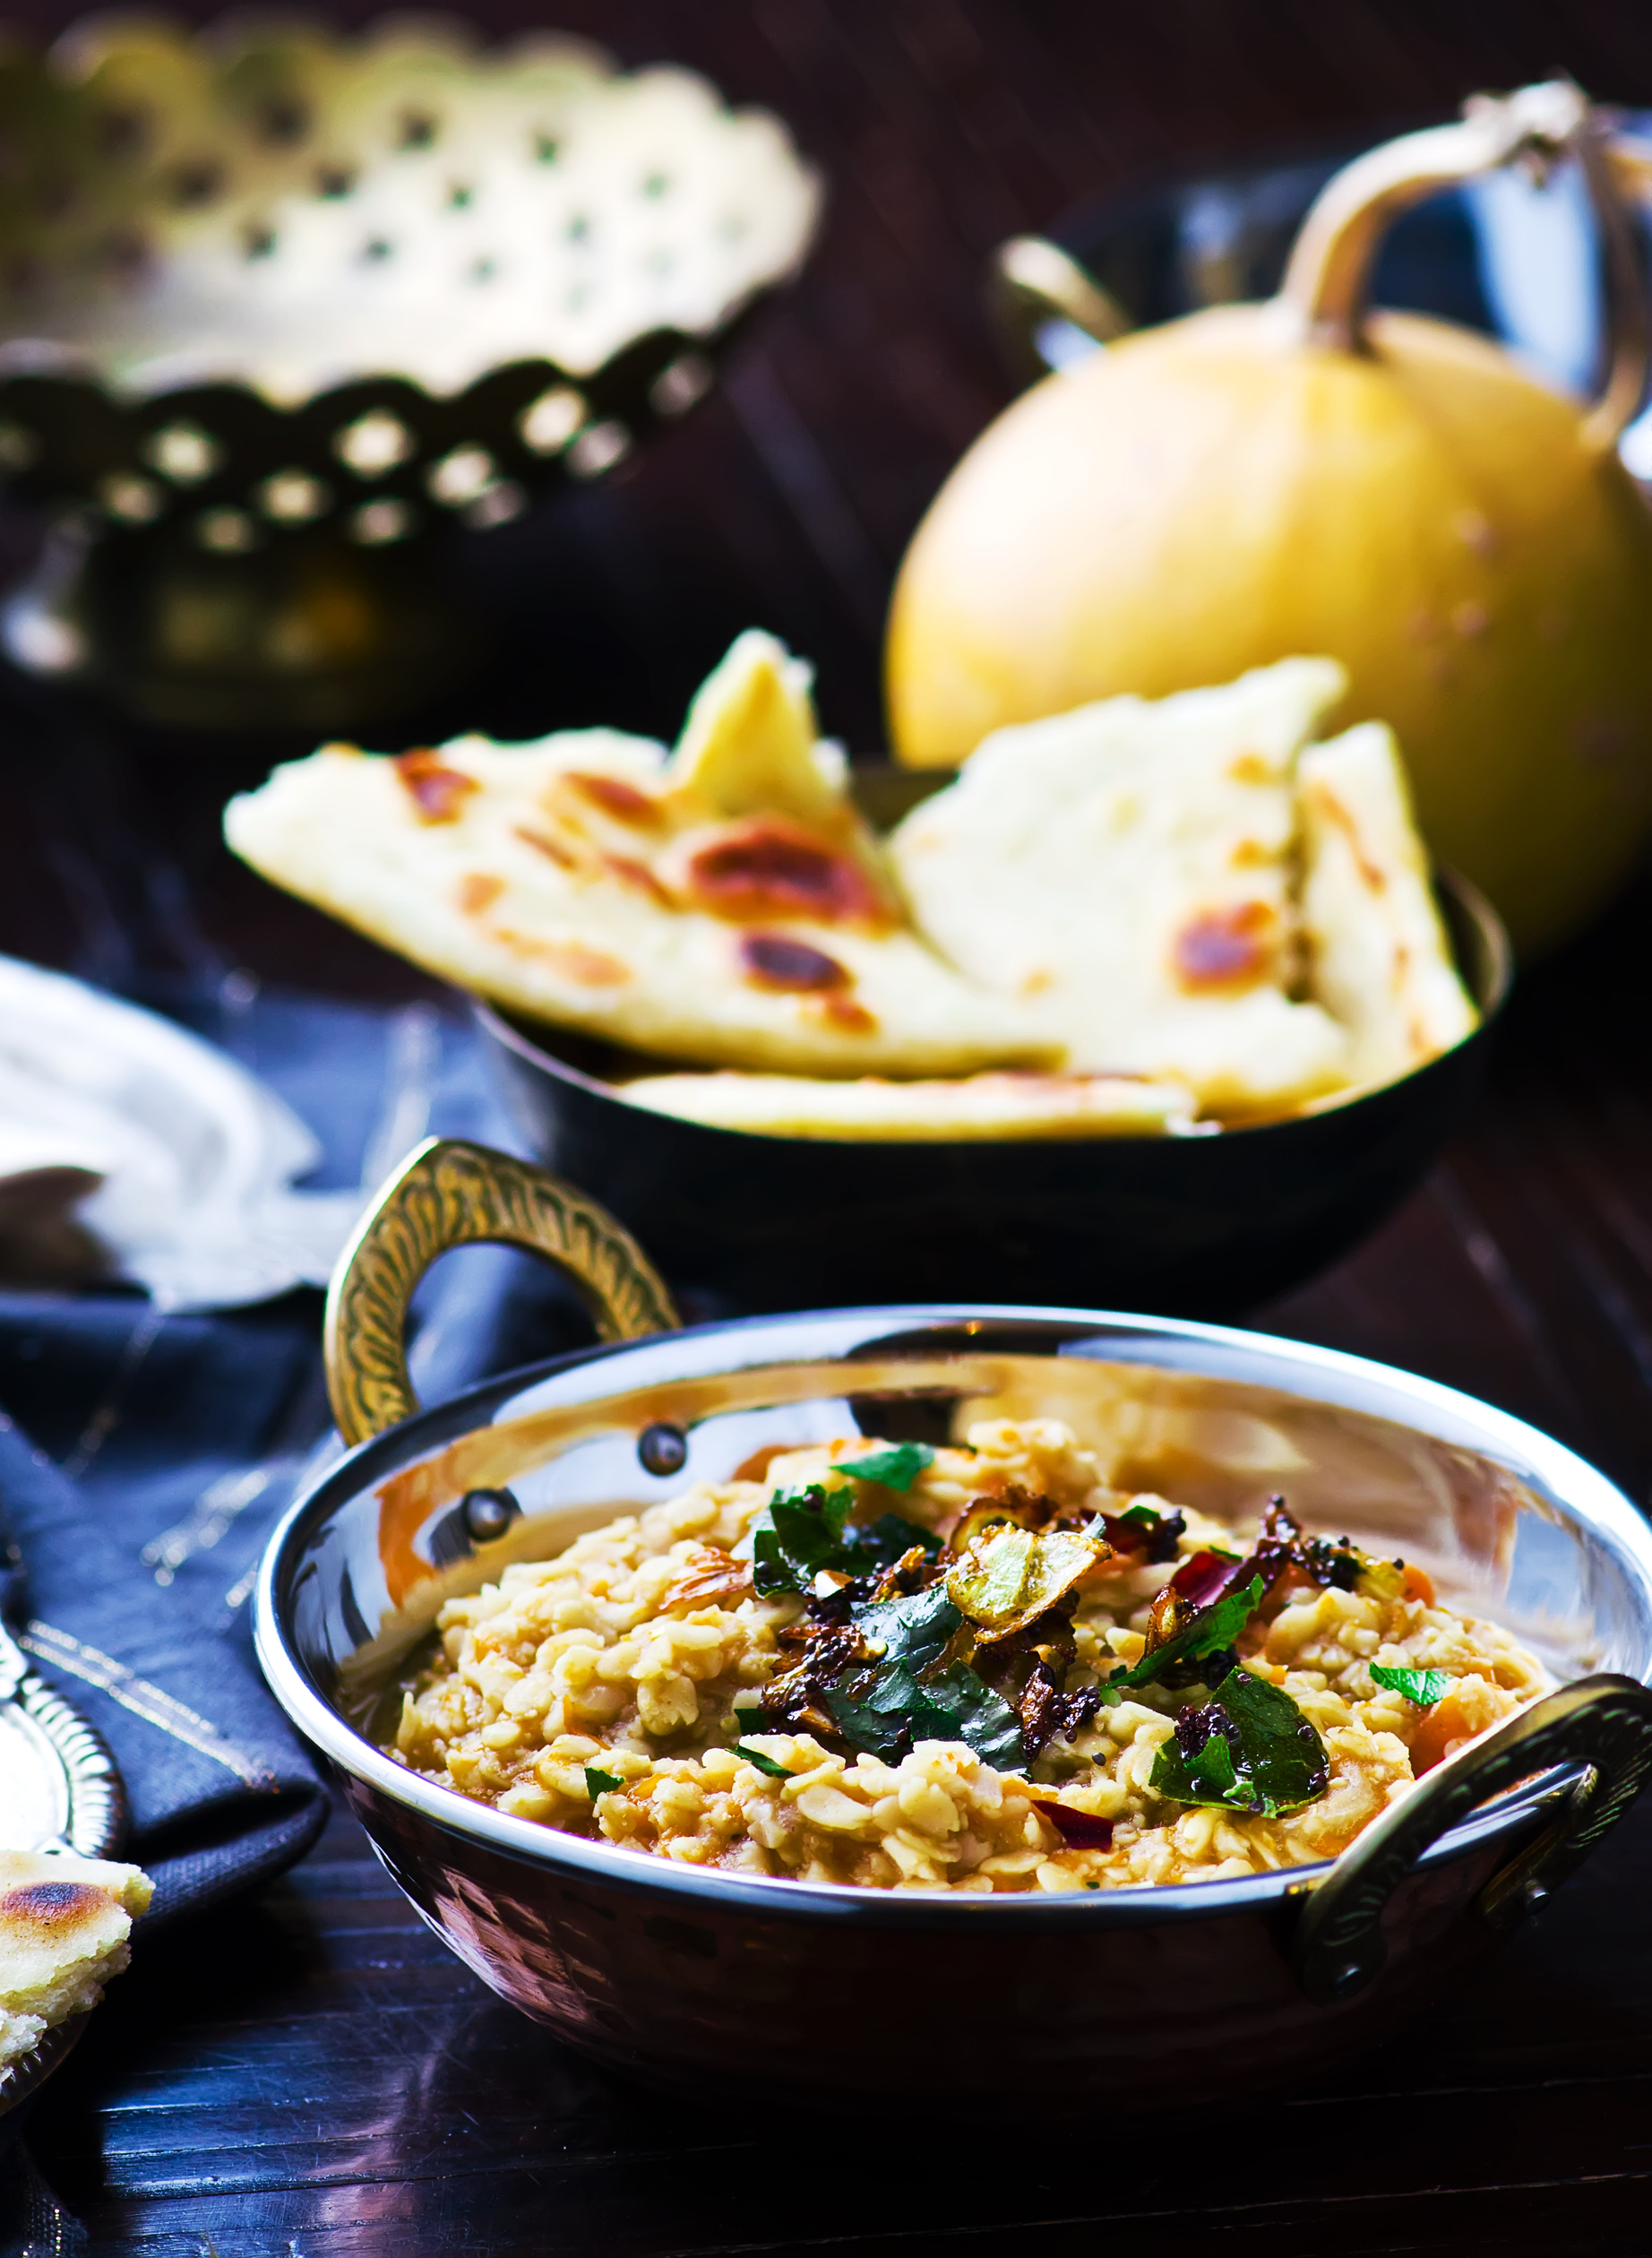 dhal with pumpkin. Indian cuisine.